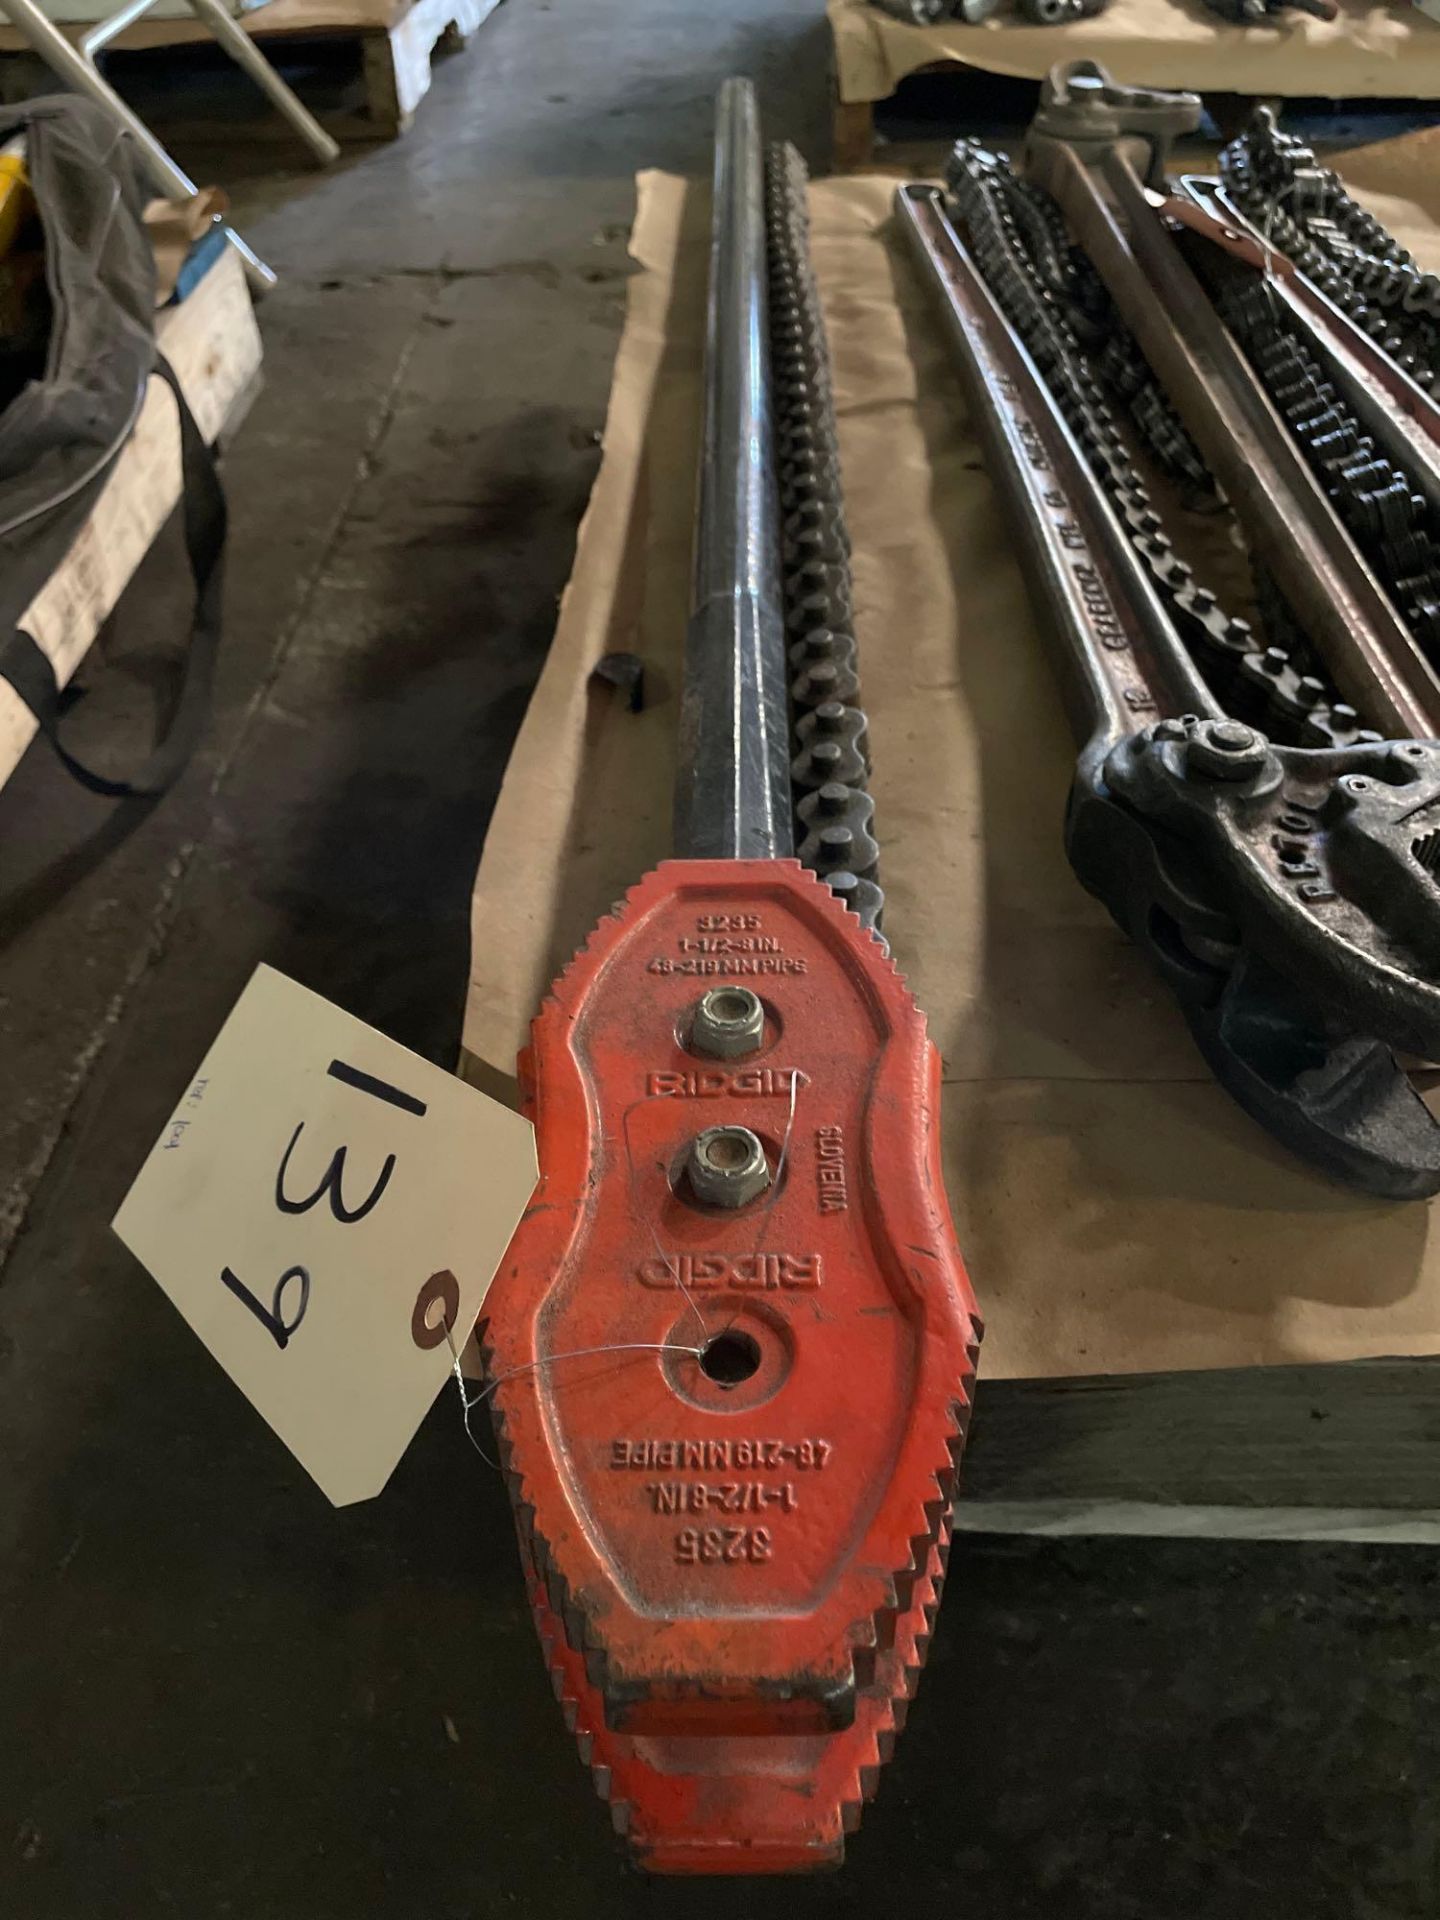 Rigid Chain Tong Double Ended Model 3235, Max. Pipe Capacity 1-1/2" - 8" - Image 4 of 4